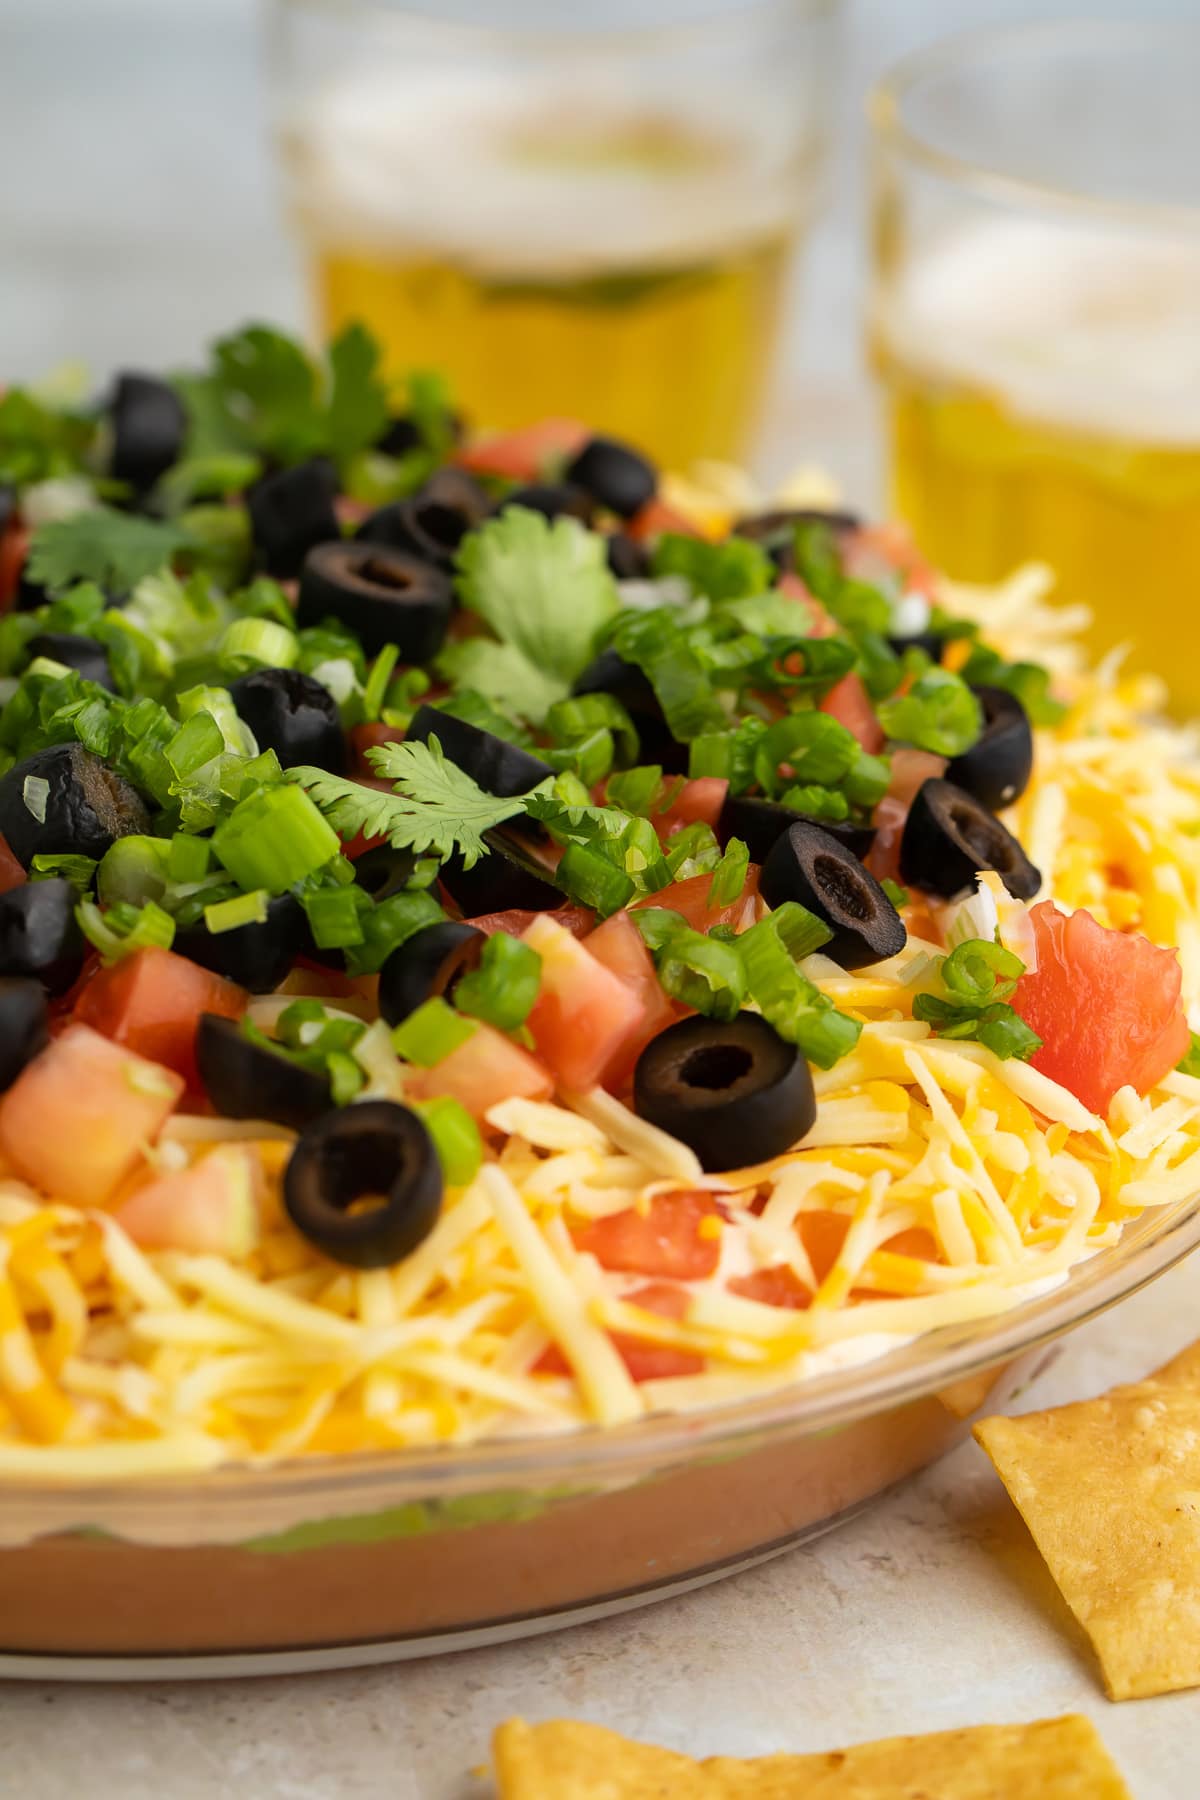 A side-view of a large glass bowl filled with a 7 layer dip.